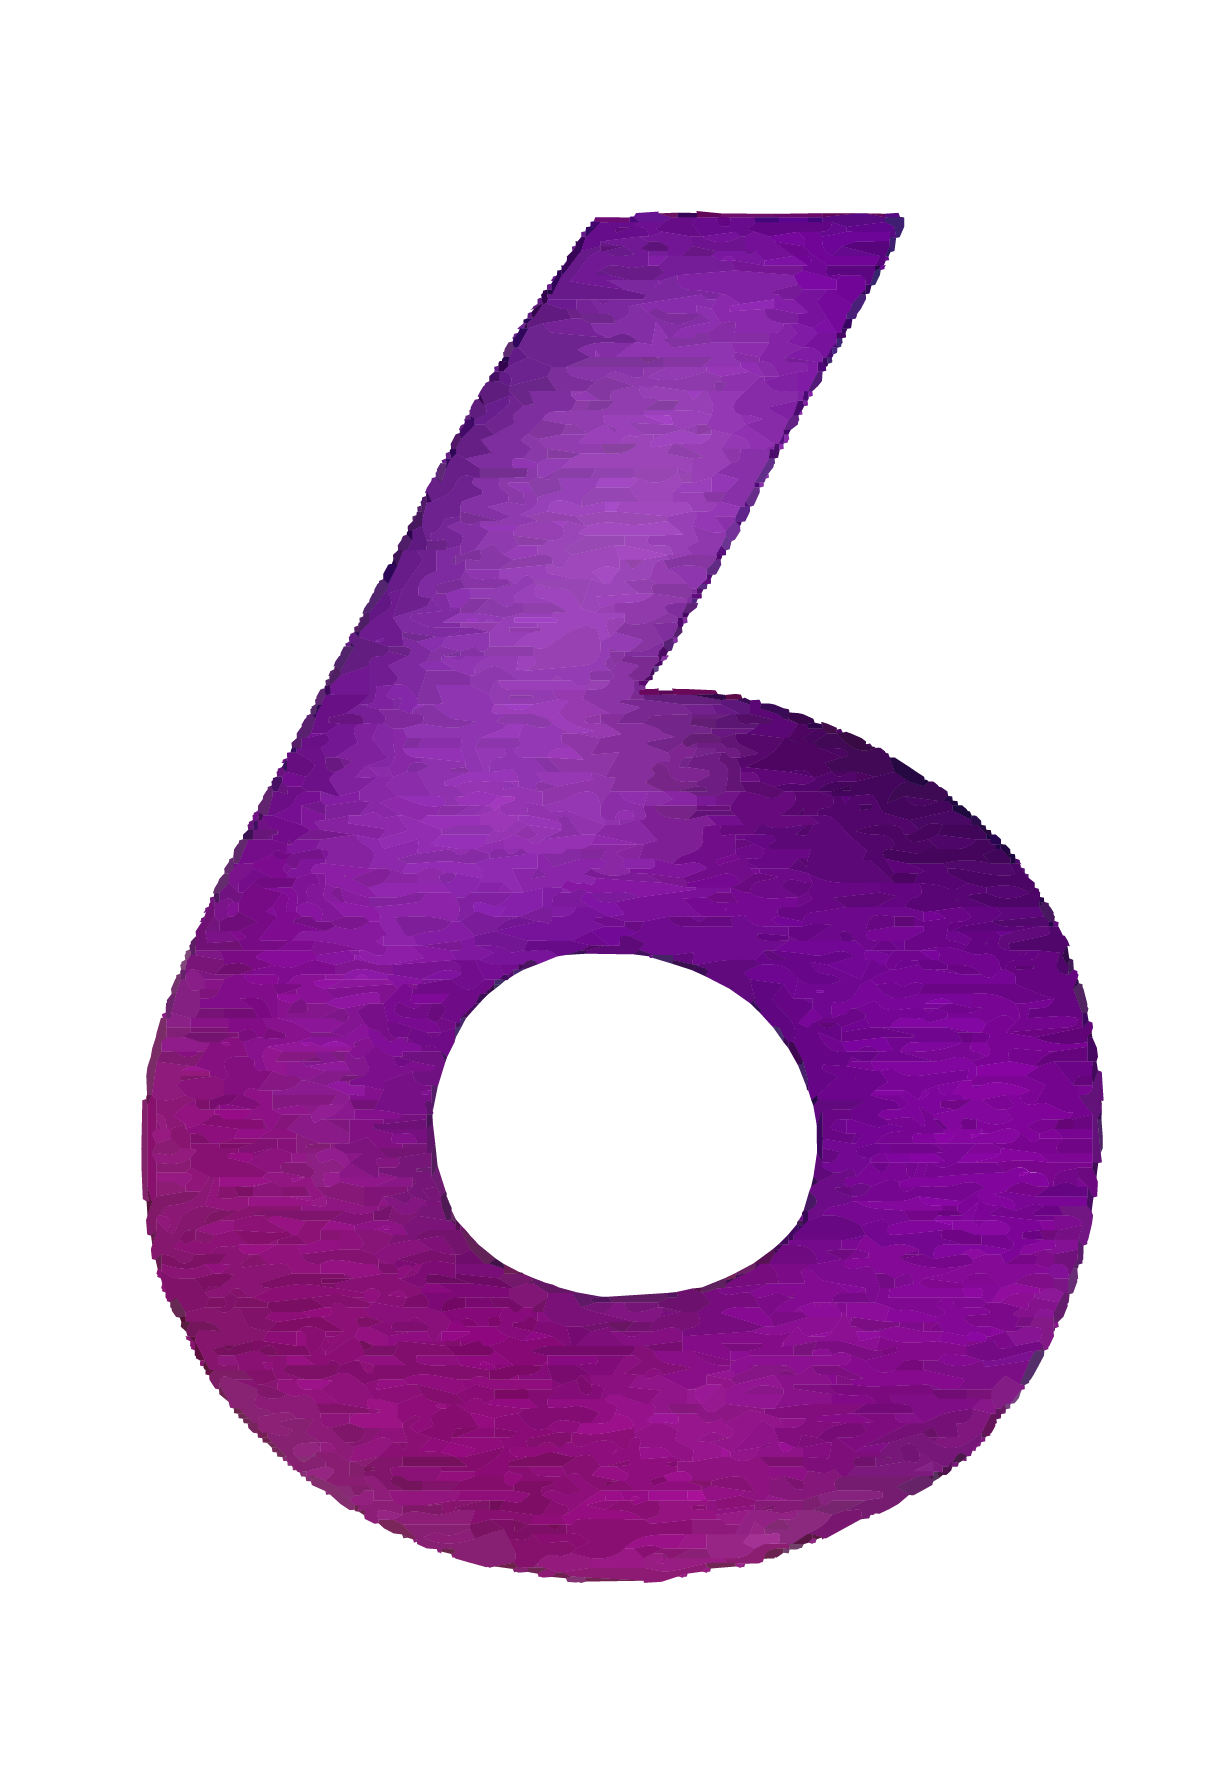 6 Number PNG Images Transparent Background | PNG Play
